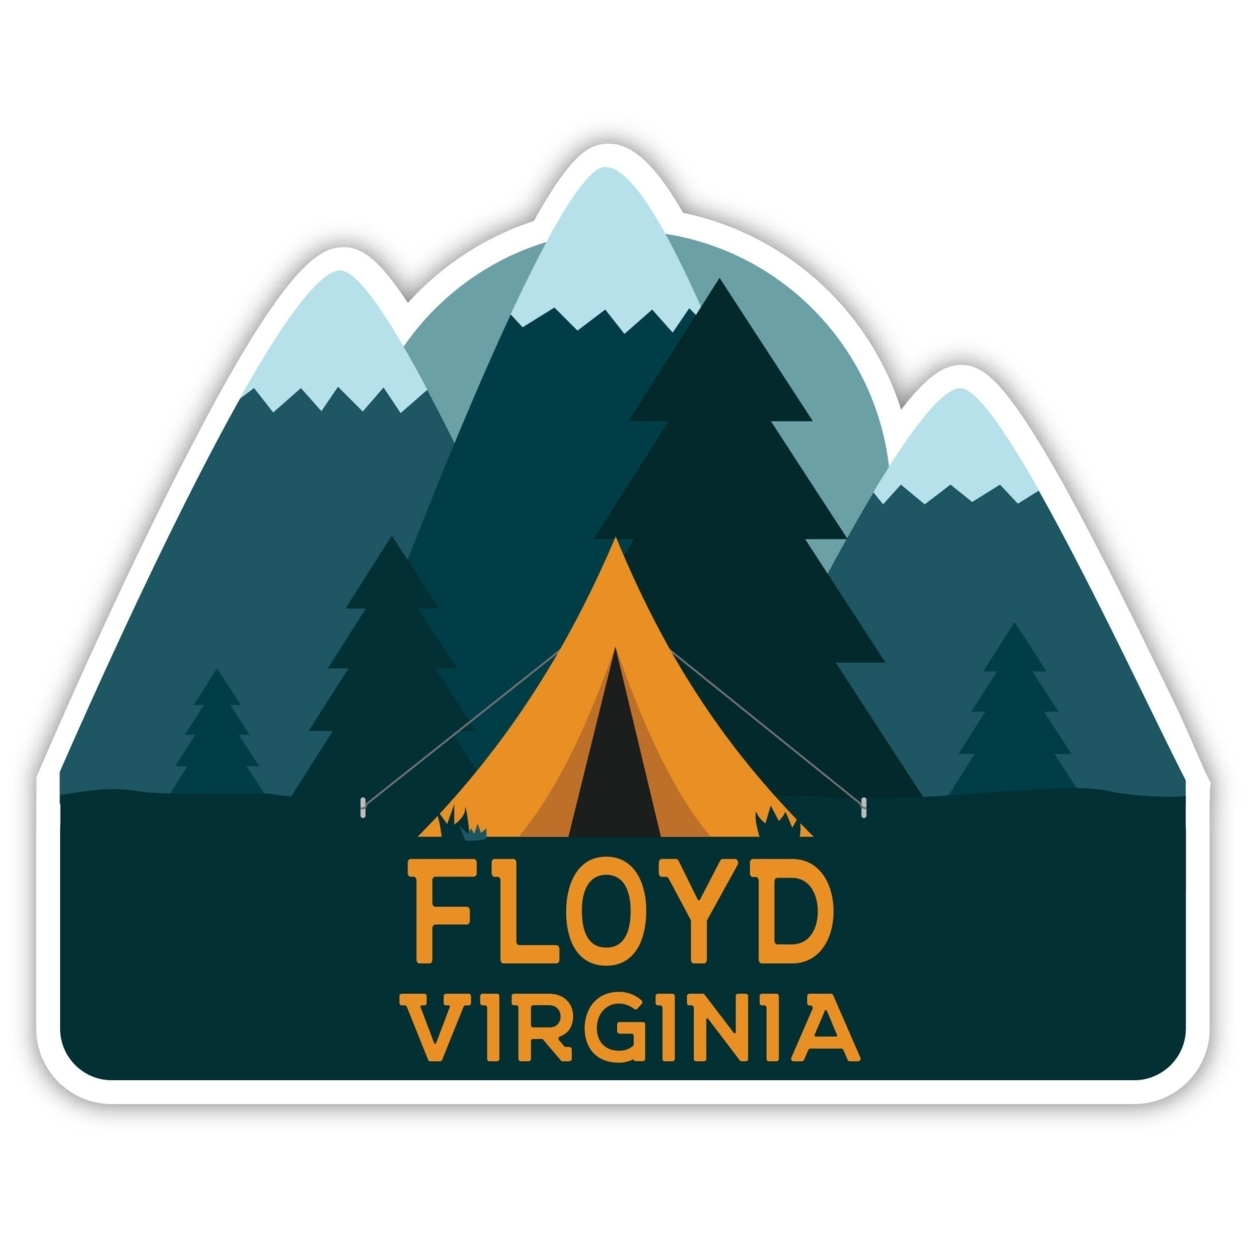 Floyd Virginia Souvenir Decorative Stickers (Choose Theme And Size) - 4-Pack, 4-Inch, Tent